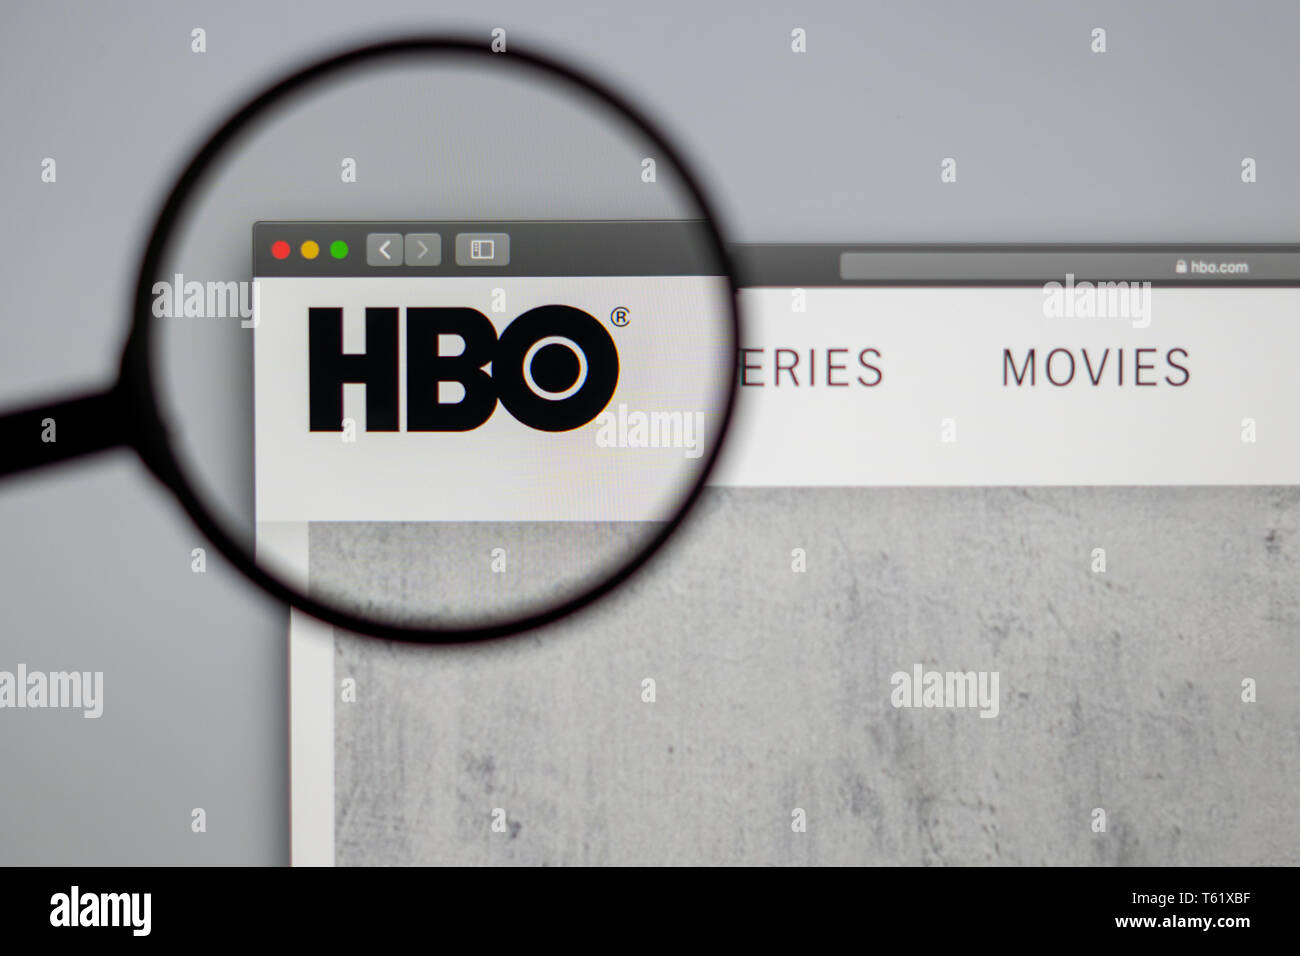 HBO company website homepage. Close up of HBO logo. Can be used as illustrative for news media or other websites, marketing or business concept Stock Photo